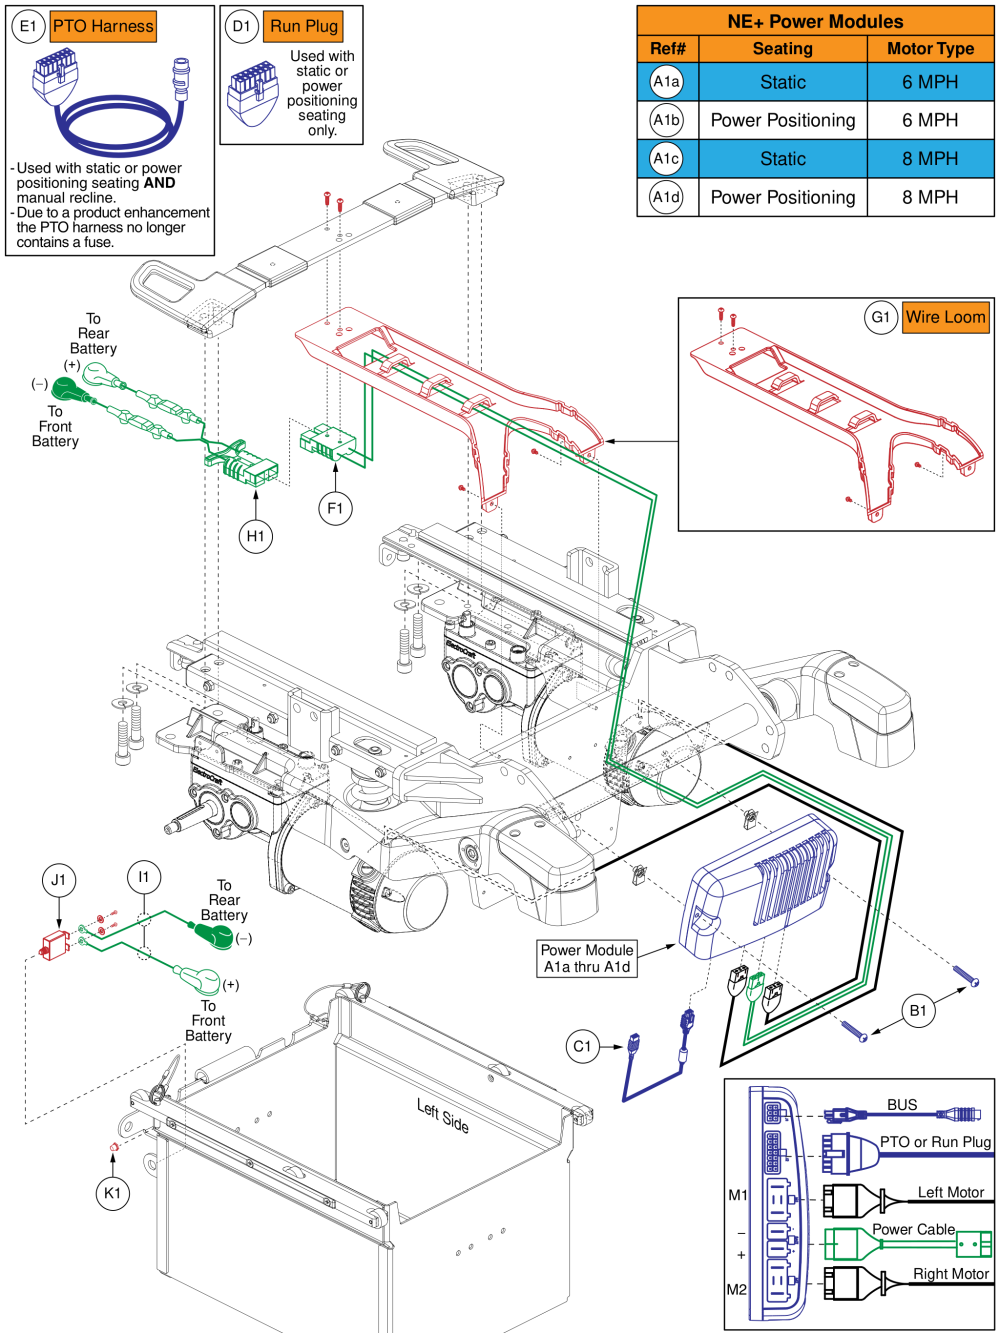 Ne+ Power Modules & Harnesses, Static / Power Seating, Rival (r44) parts diagram